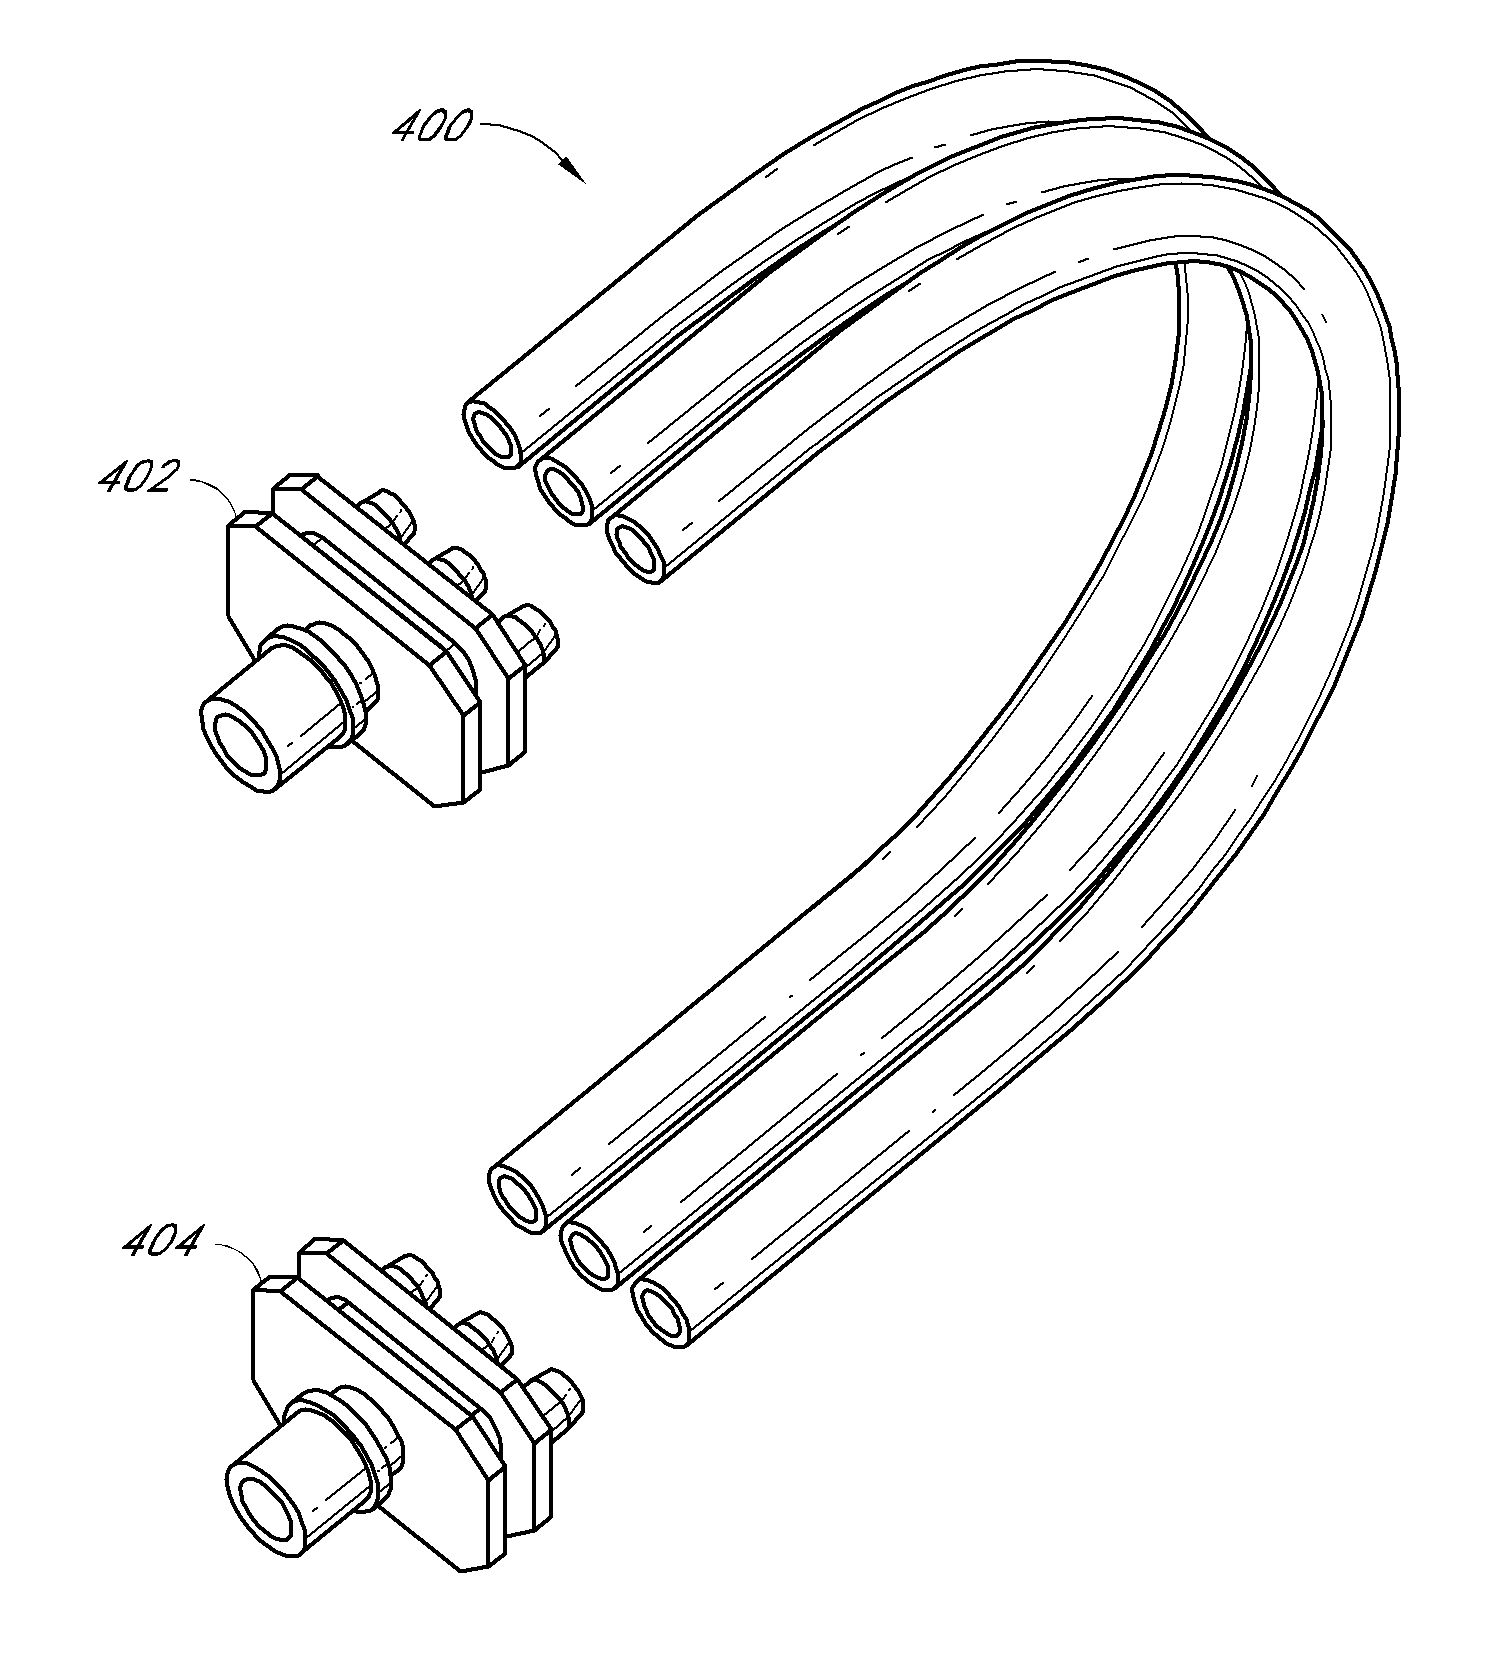 High pressure, high flow rate tubing assembly and adapter for a positive displacement pump